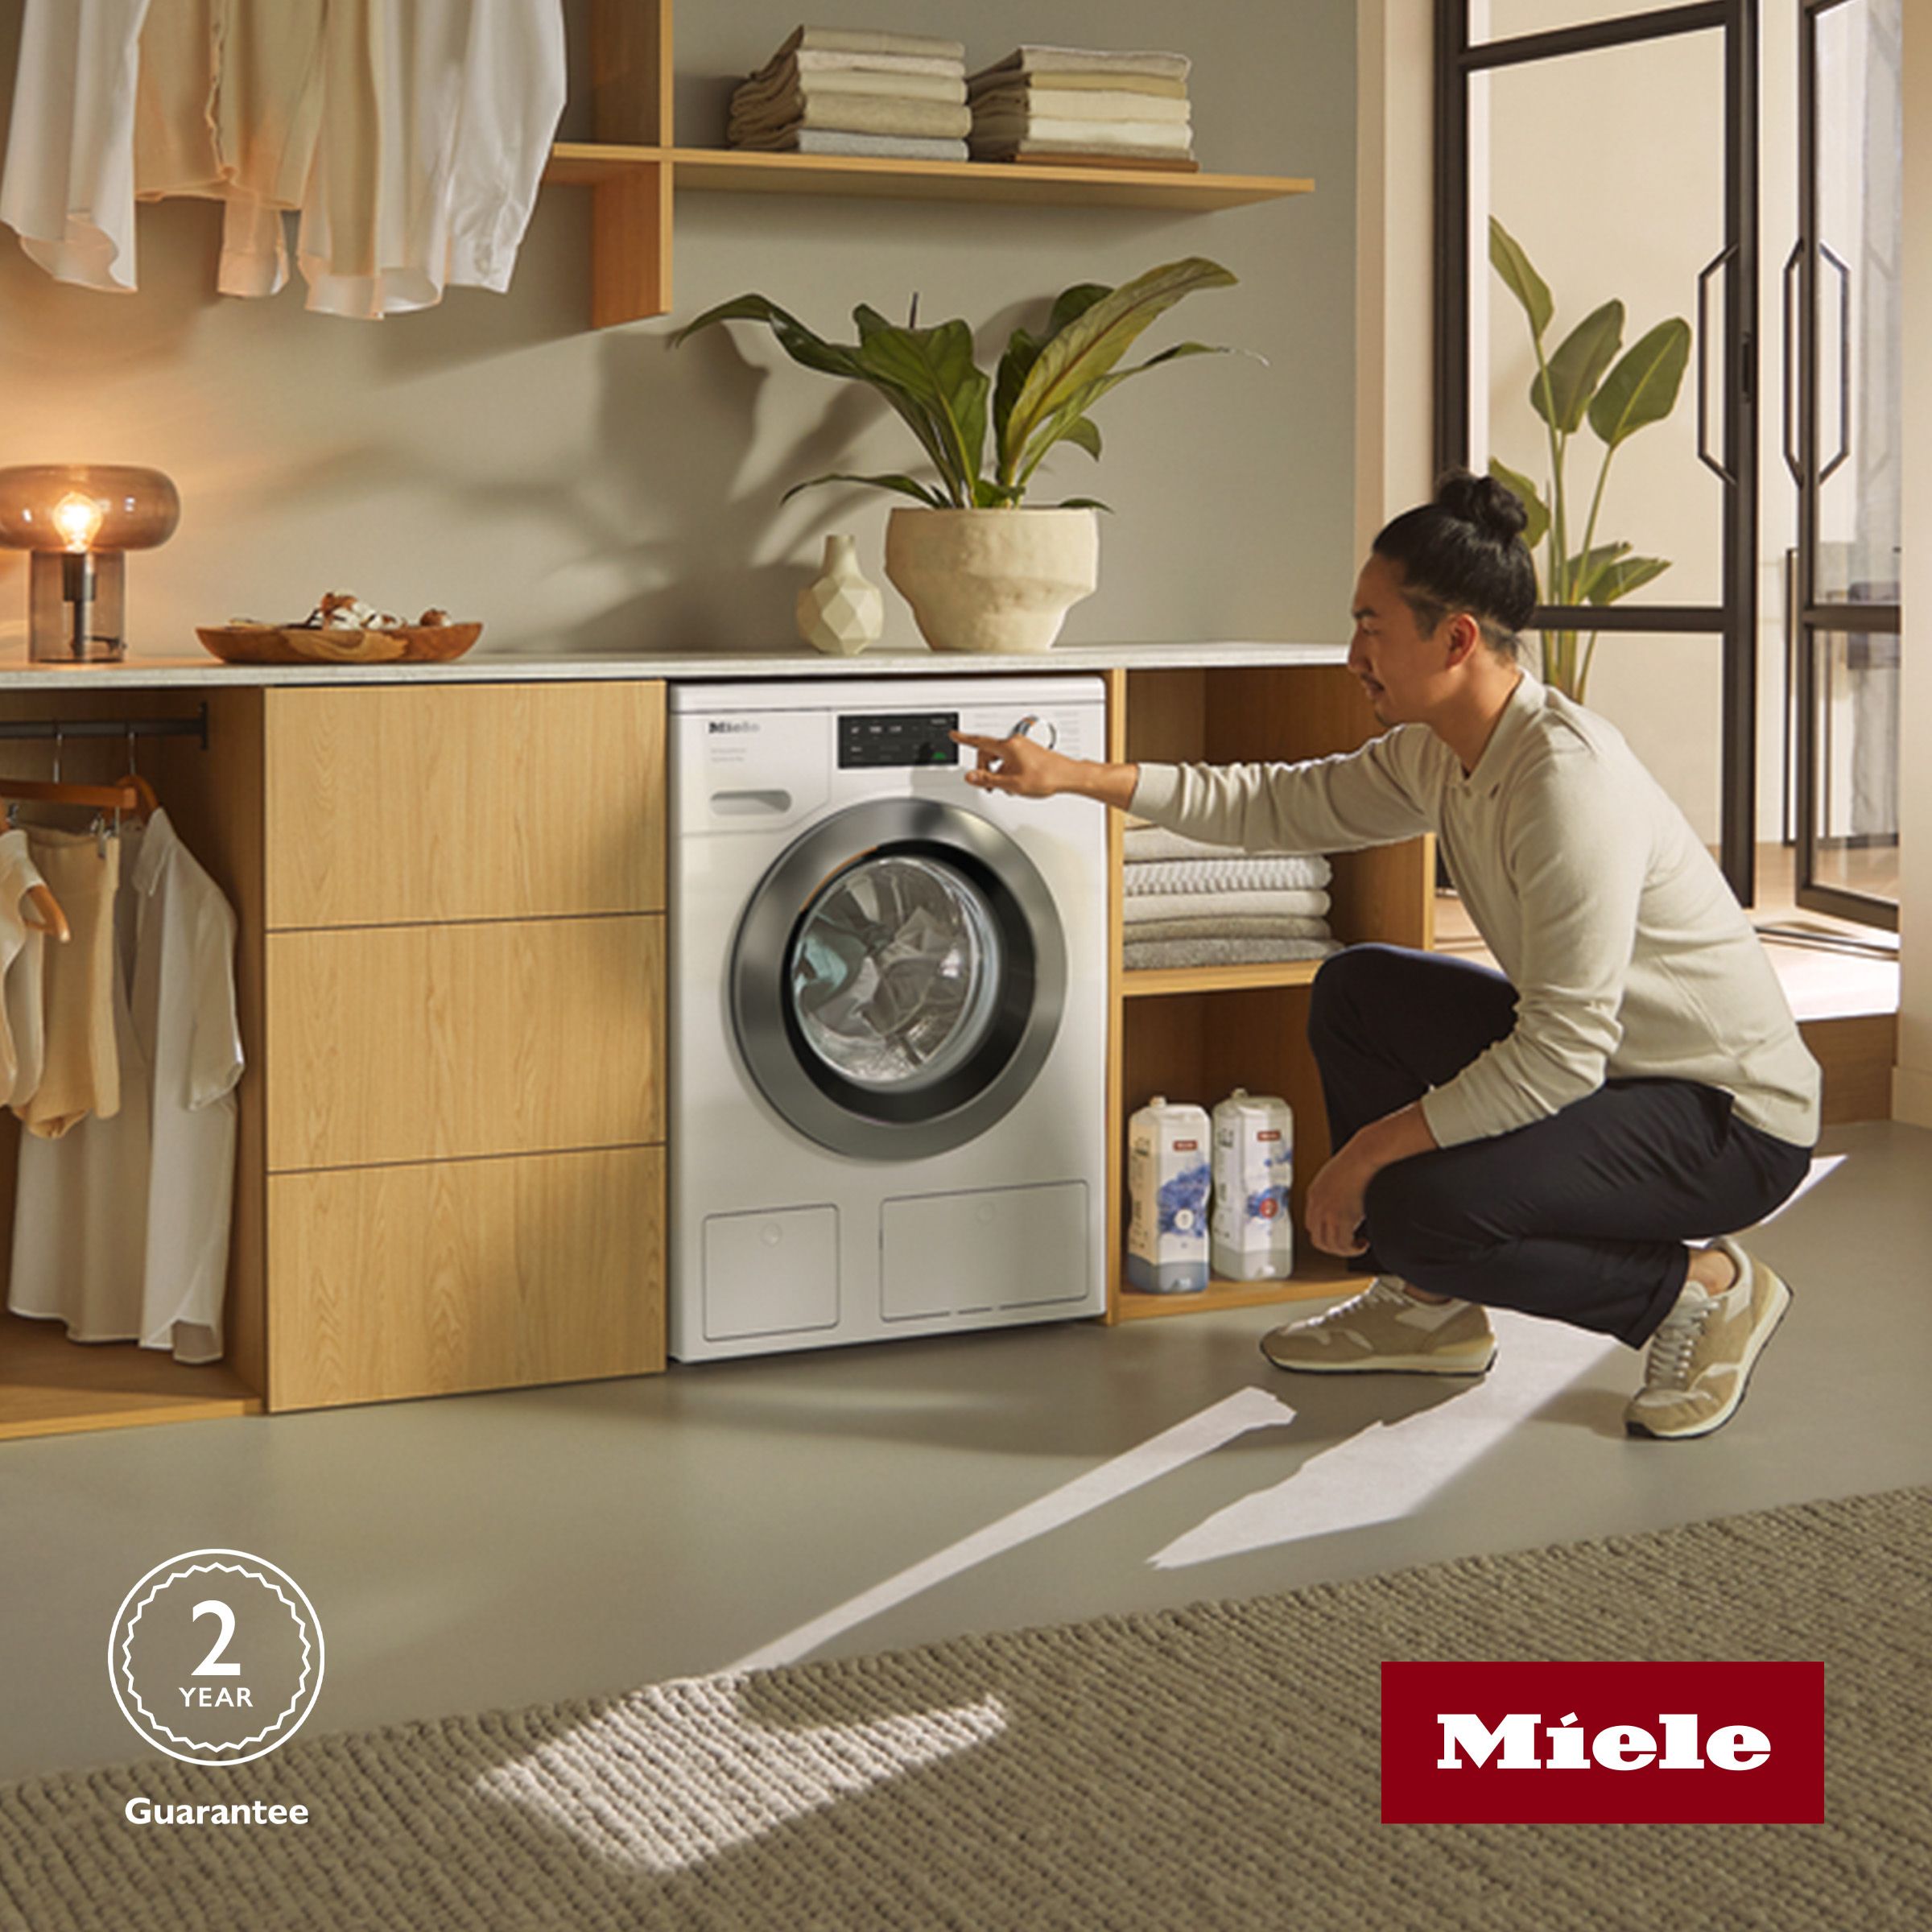 Elevate your home this autumn, with Miele’s A-rated laundry appliances